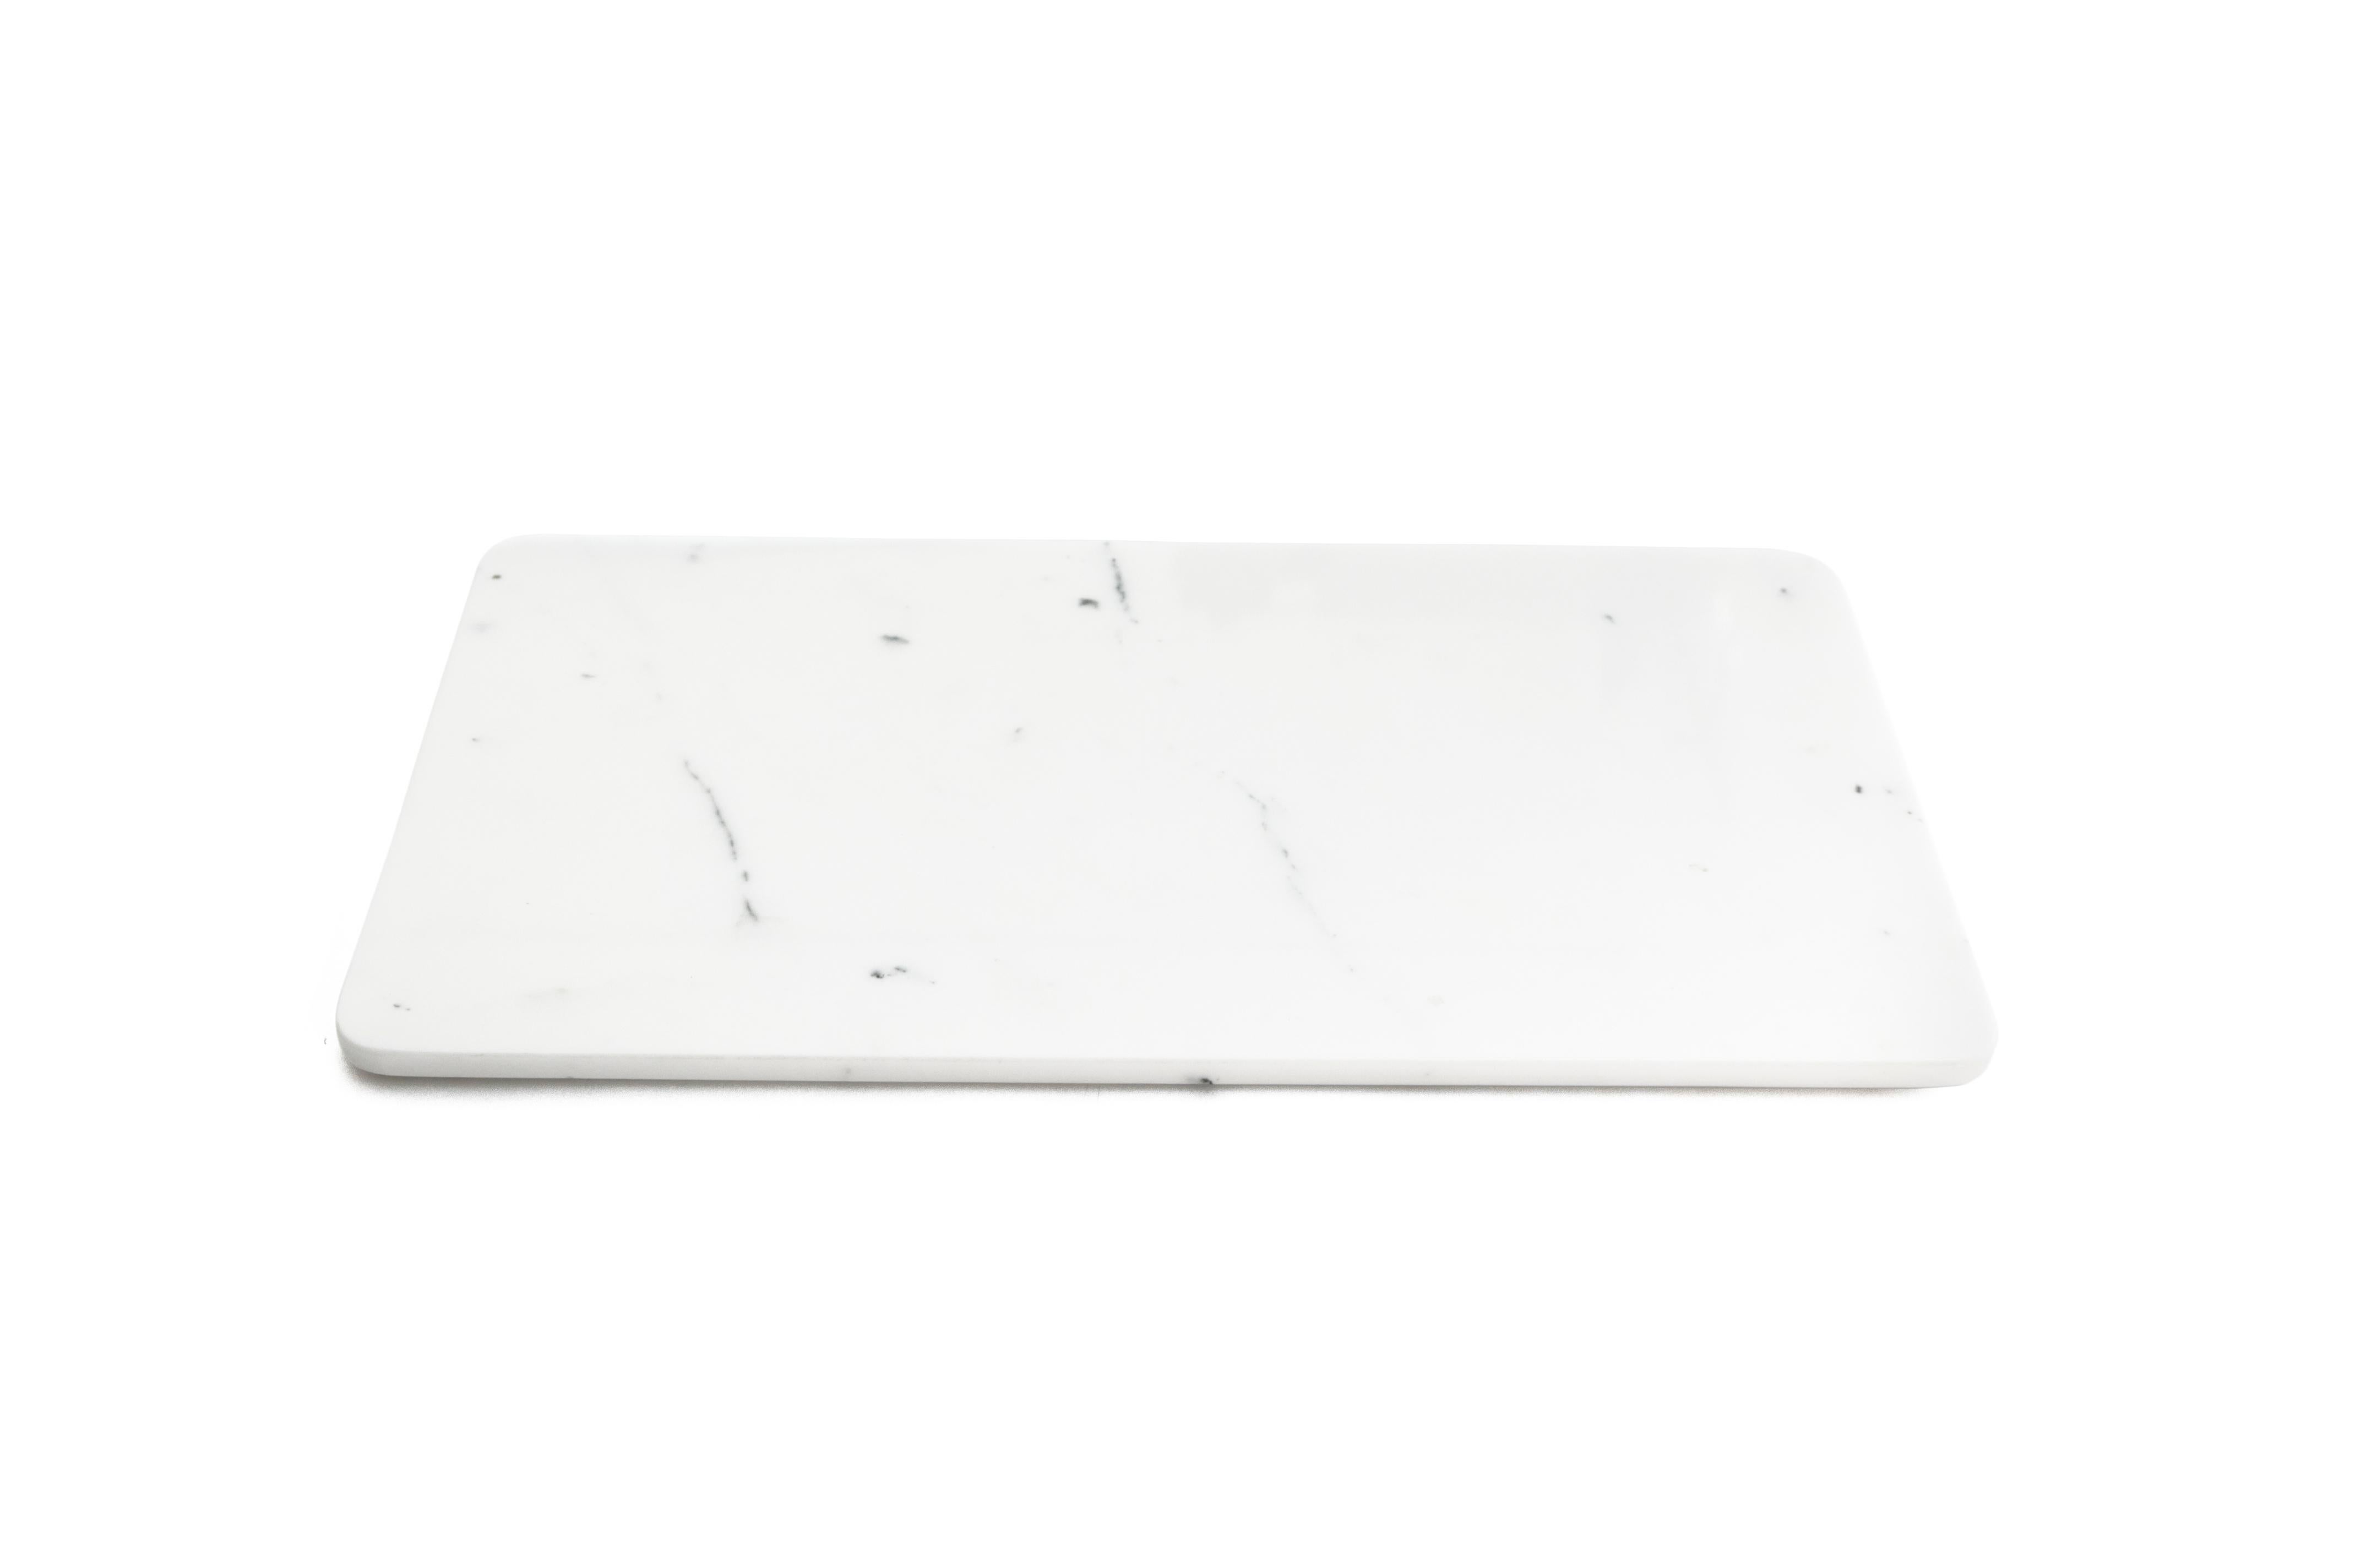 Canapè, cheese plate, sushi plate, serving dish in white Carrara polished marble.

Ideal for spa, hotel, restaurant and to serve food in a very sophisticate plate in your house. It can be used also as a nice display of sweets and chocolates.
Each